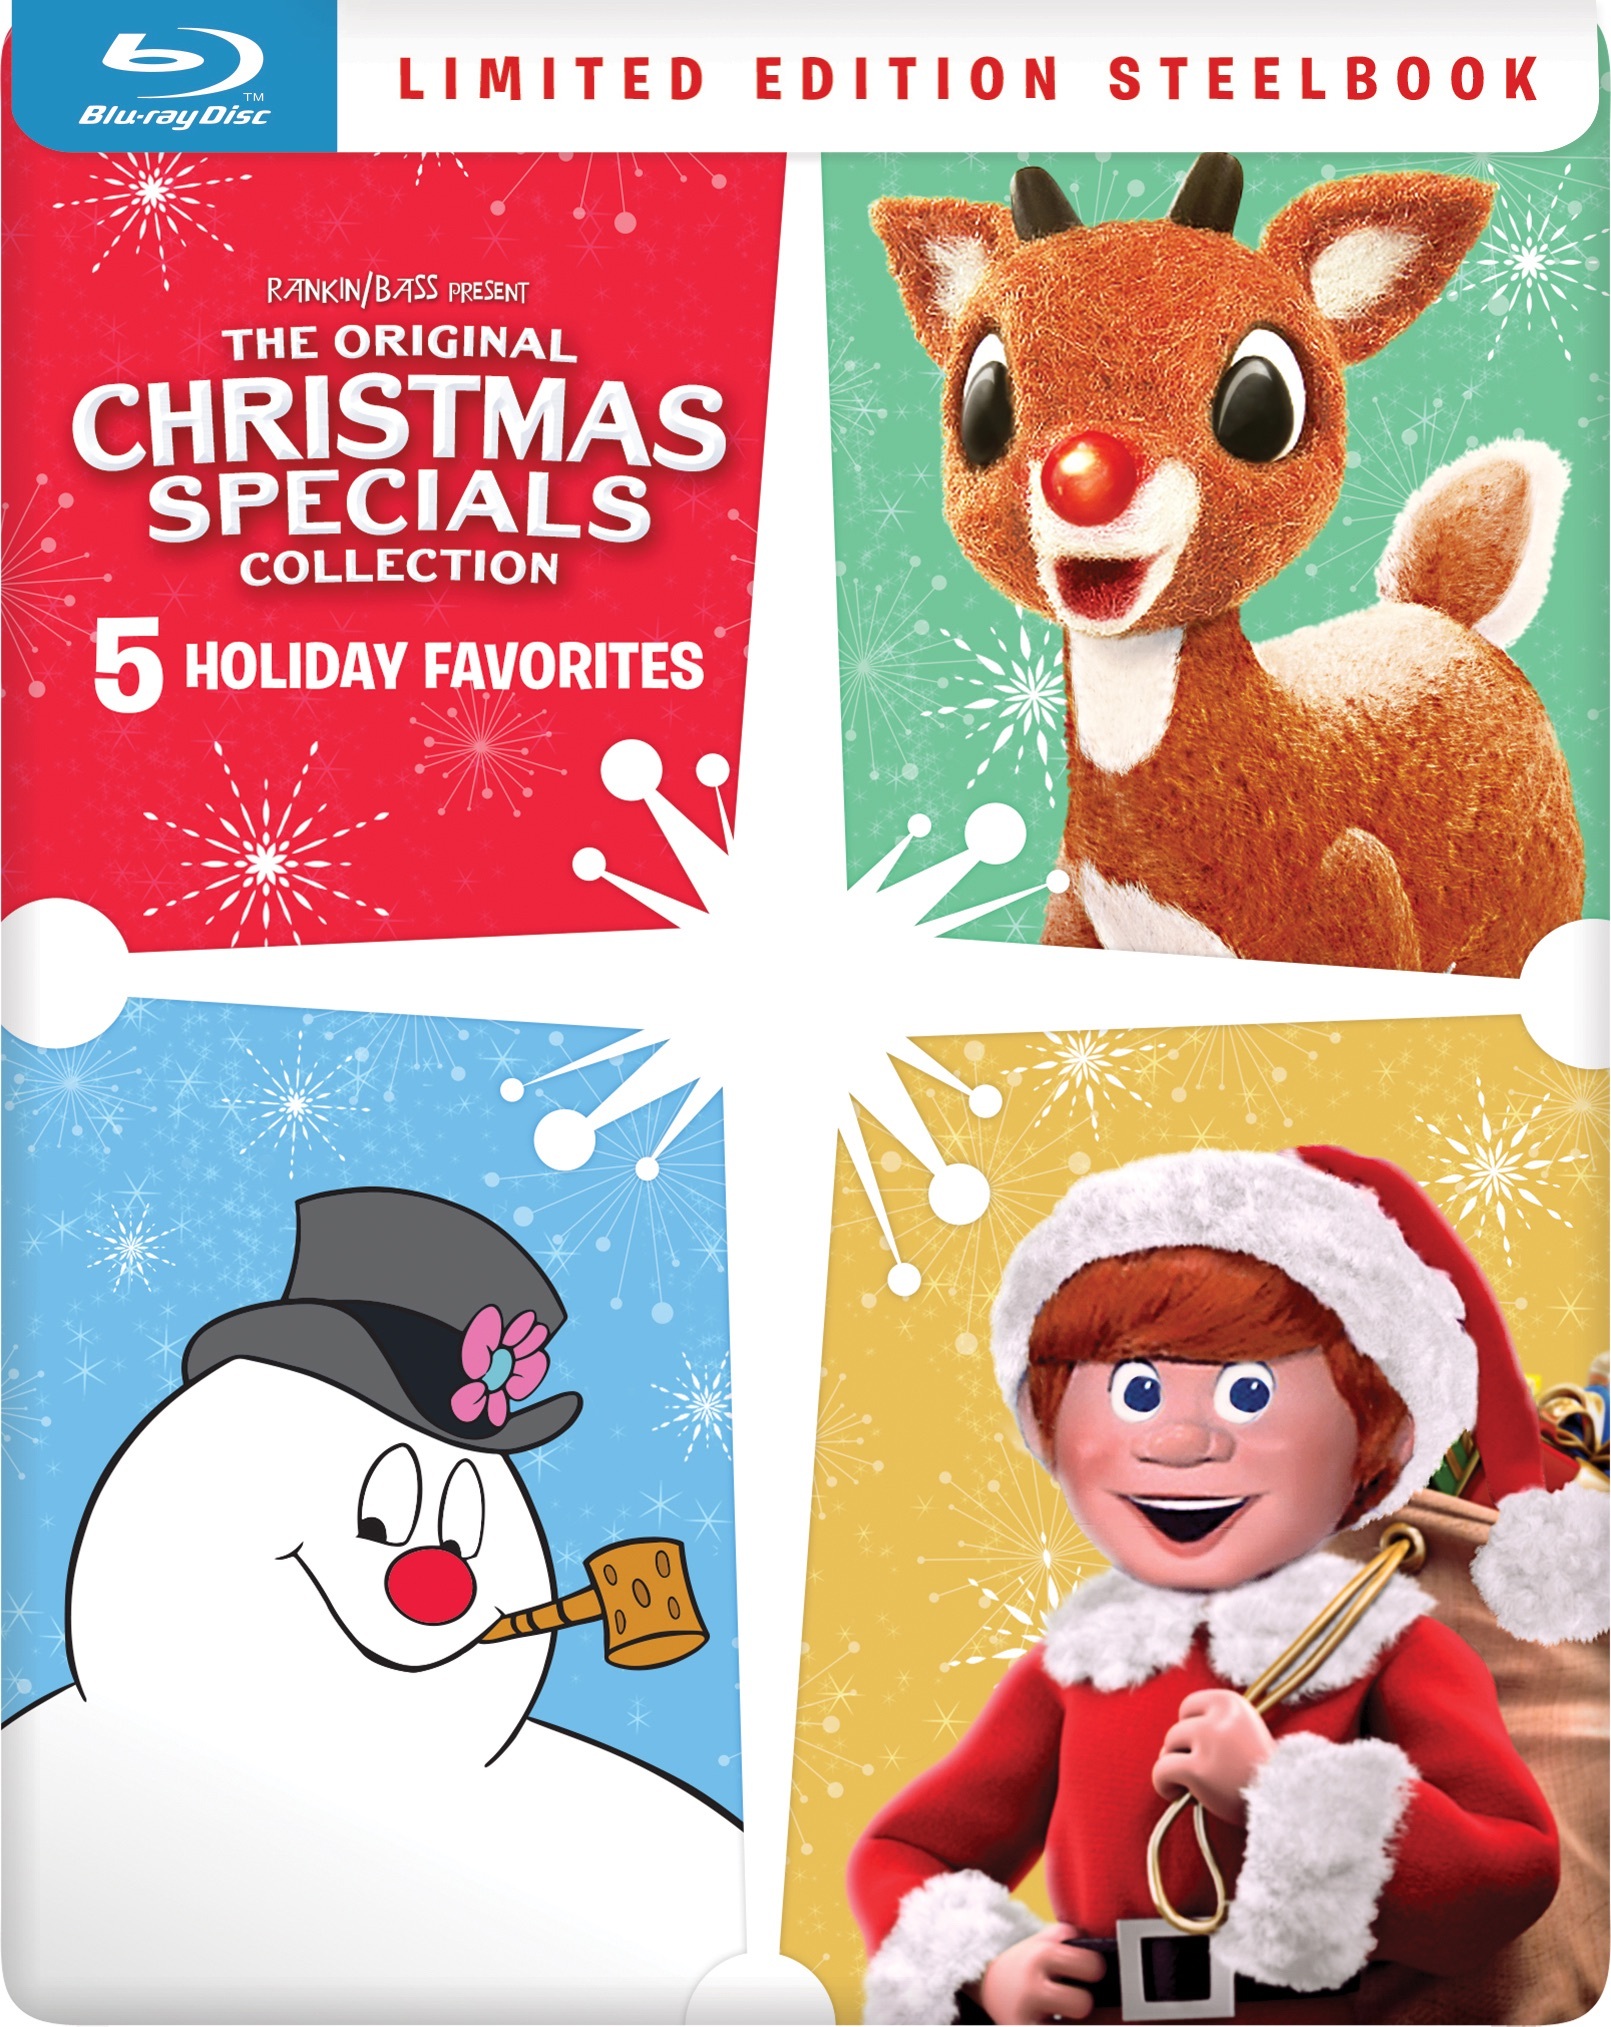 The Original Christmas Specials Collection (Limited Edition Steelbook Box Set) - Blu-ray [ 1970 ] - Animation Movies on Blu-ray